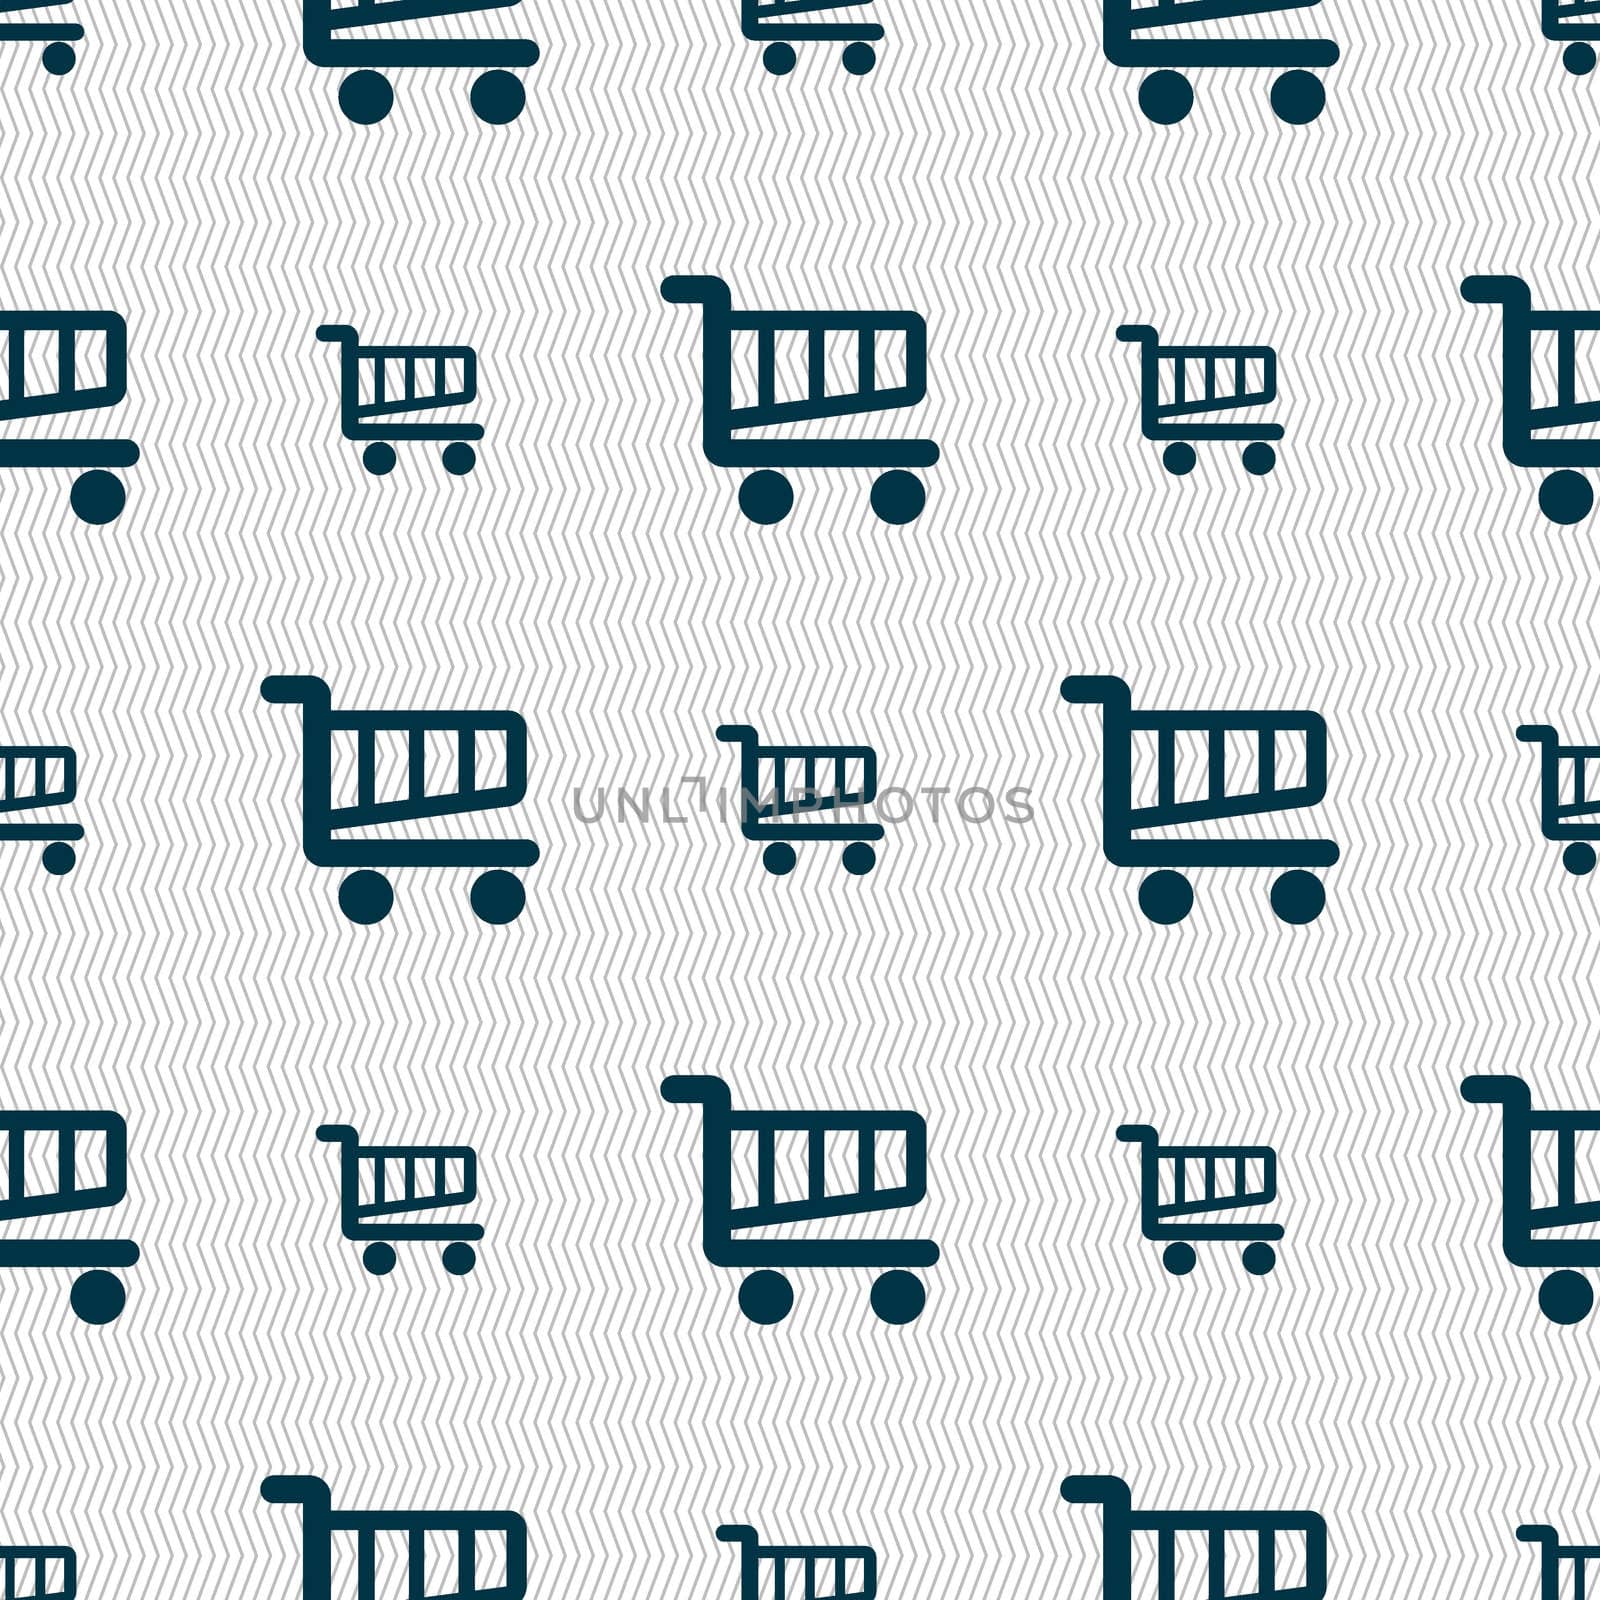 Shopping Cart sign icon. Online buying button. Seamless abstract background with geometric shapes. illustration